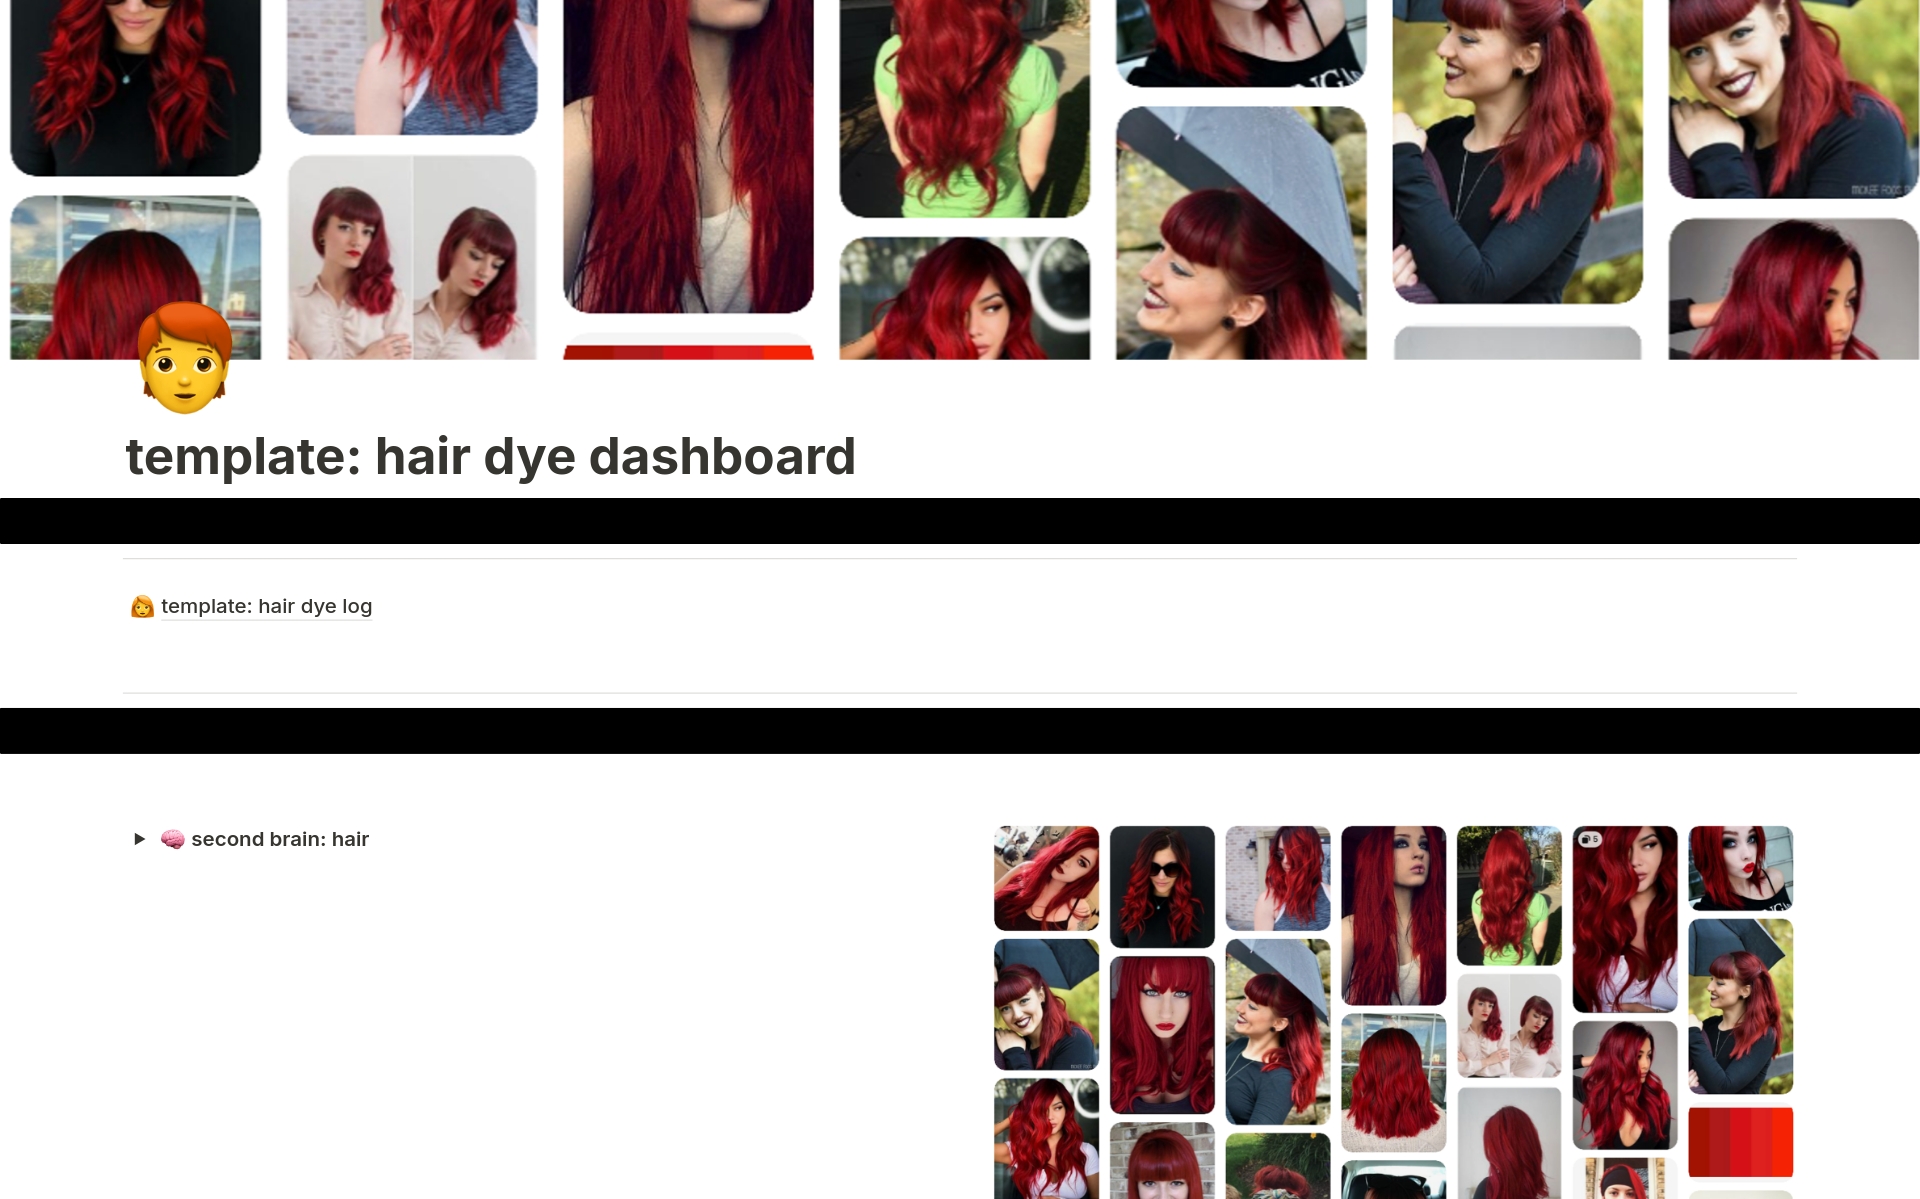 A simple way to track your hair dye journey.